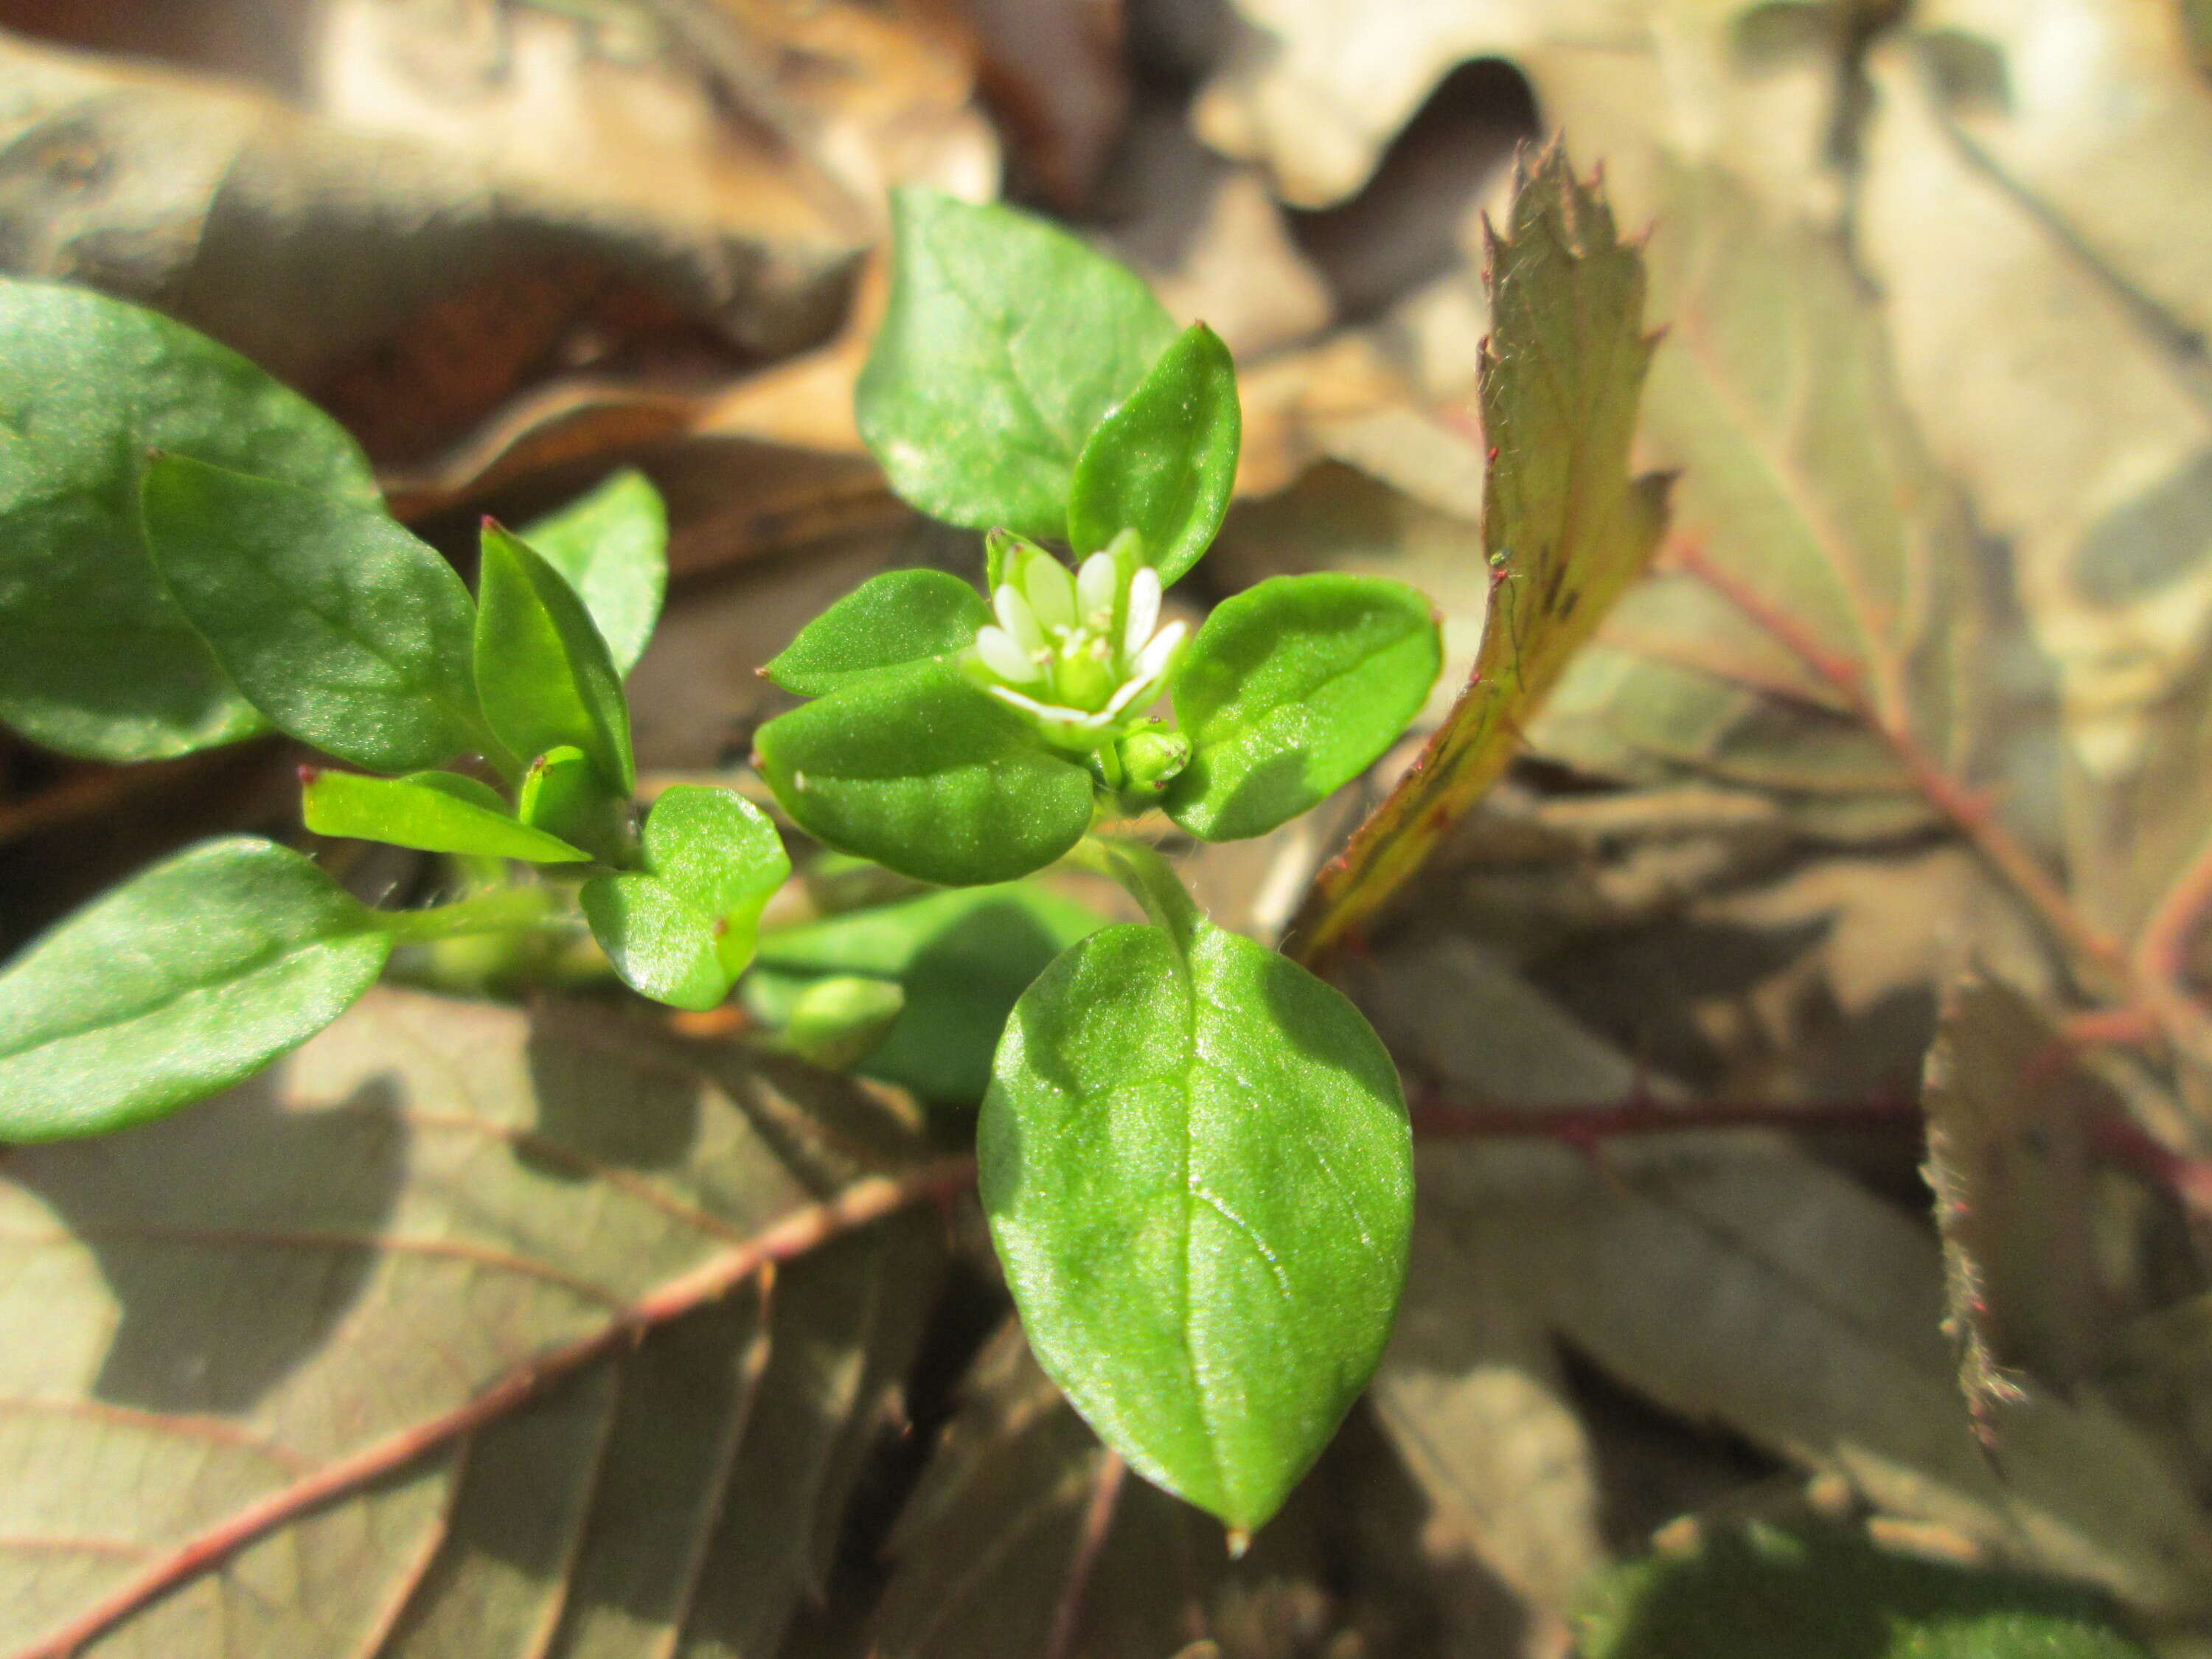 Image of common chickweed